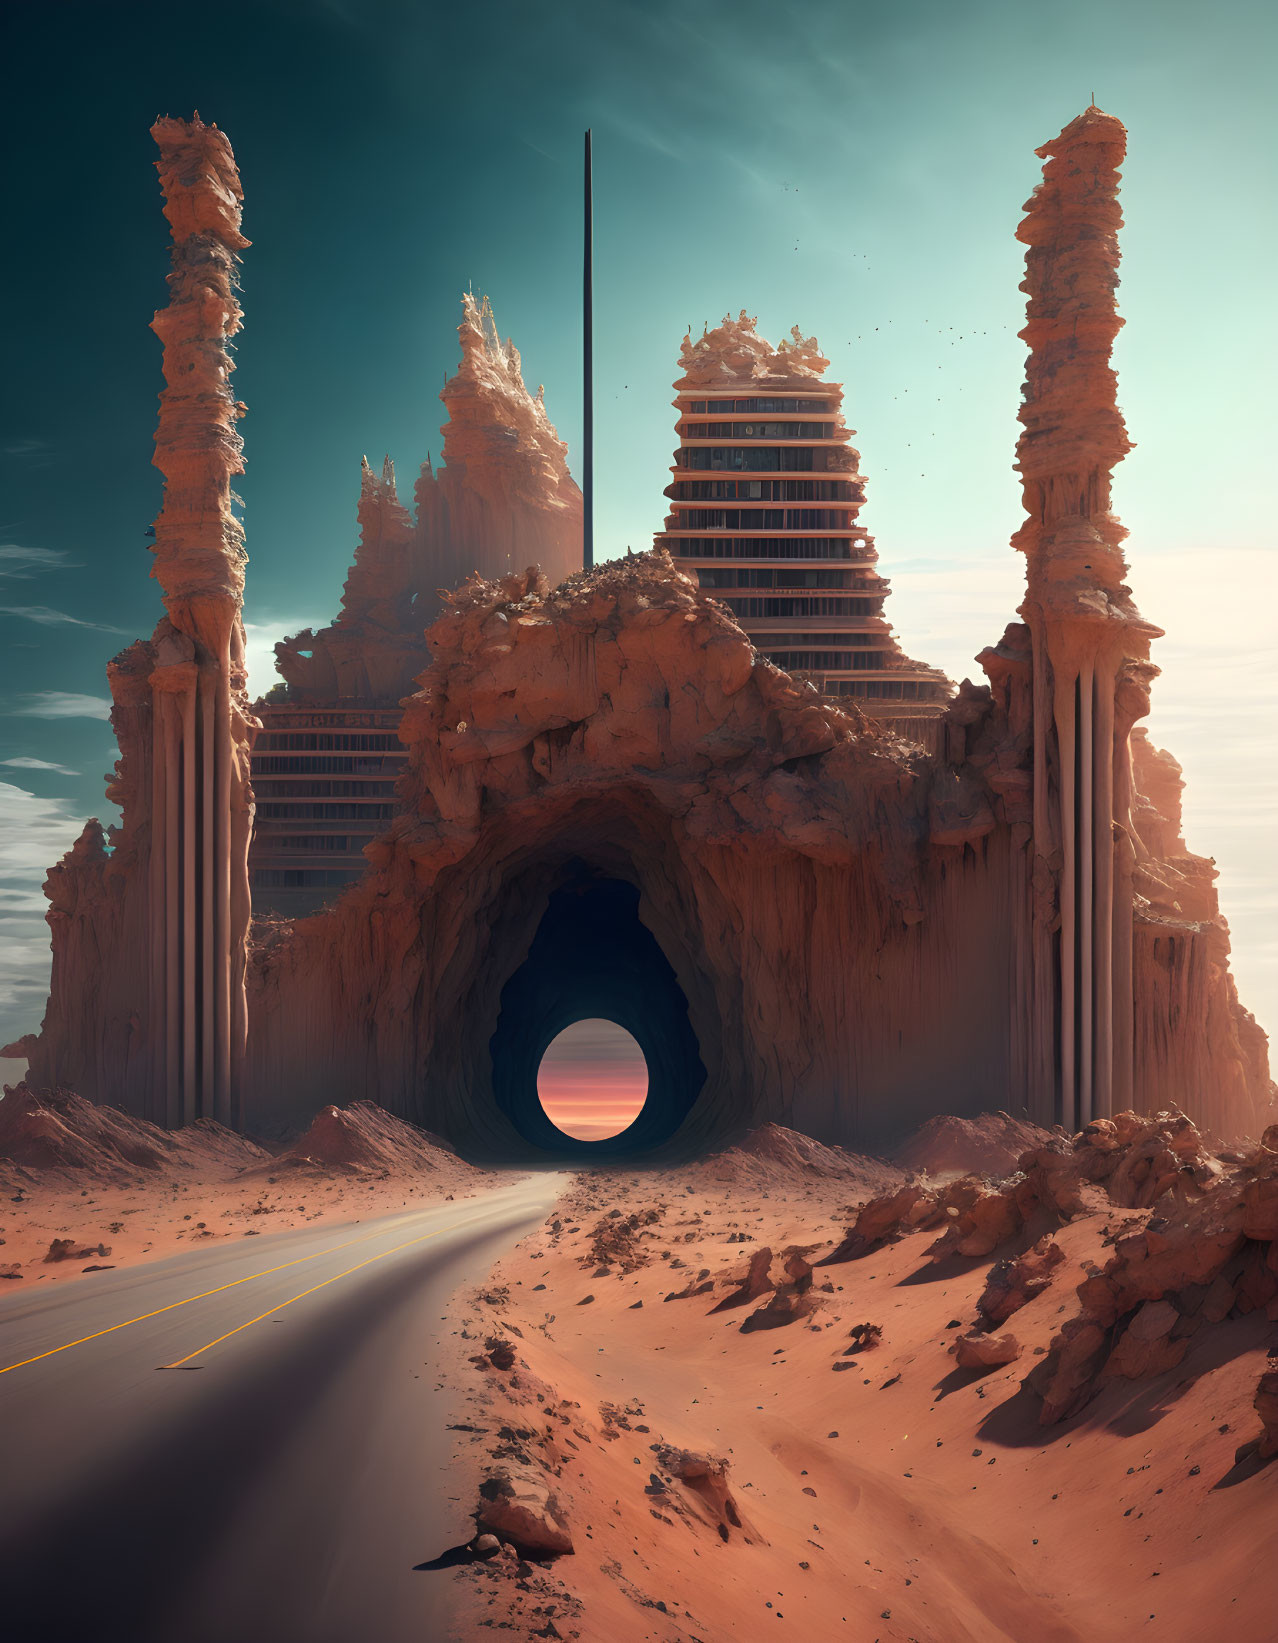 Futuristic towers rise above desert landscape with tunnel entrance